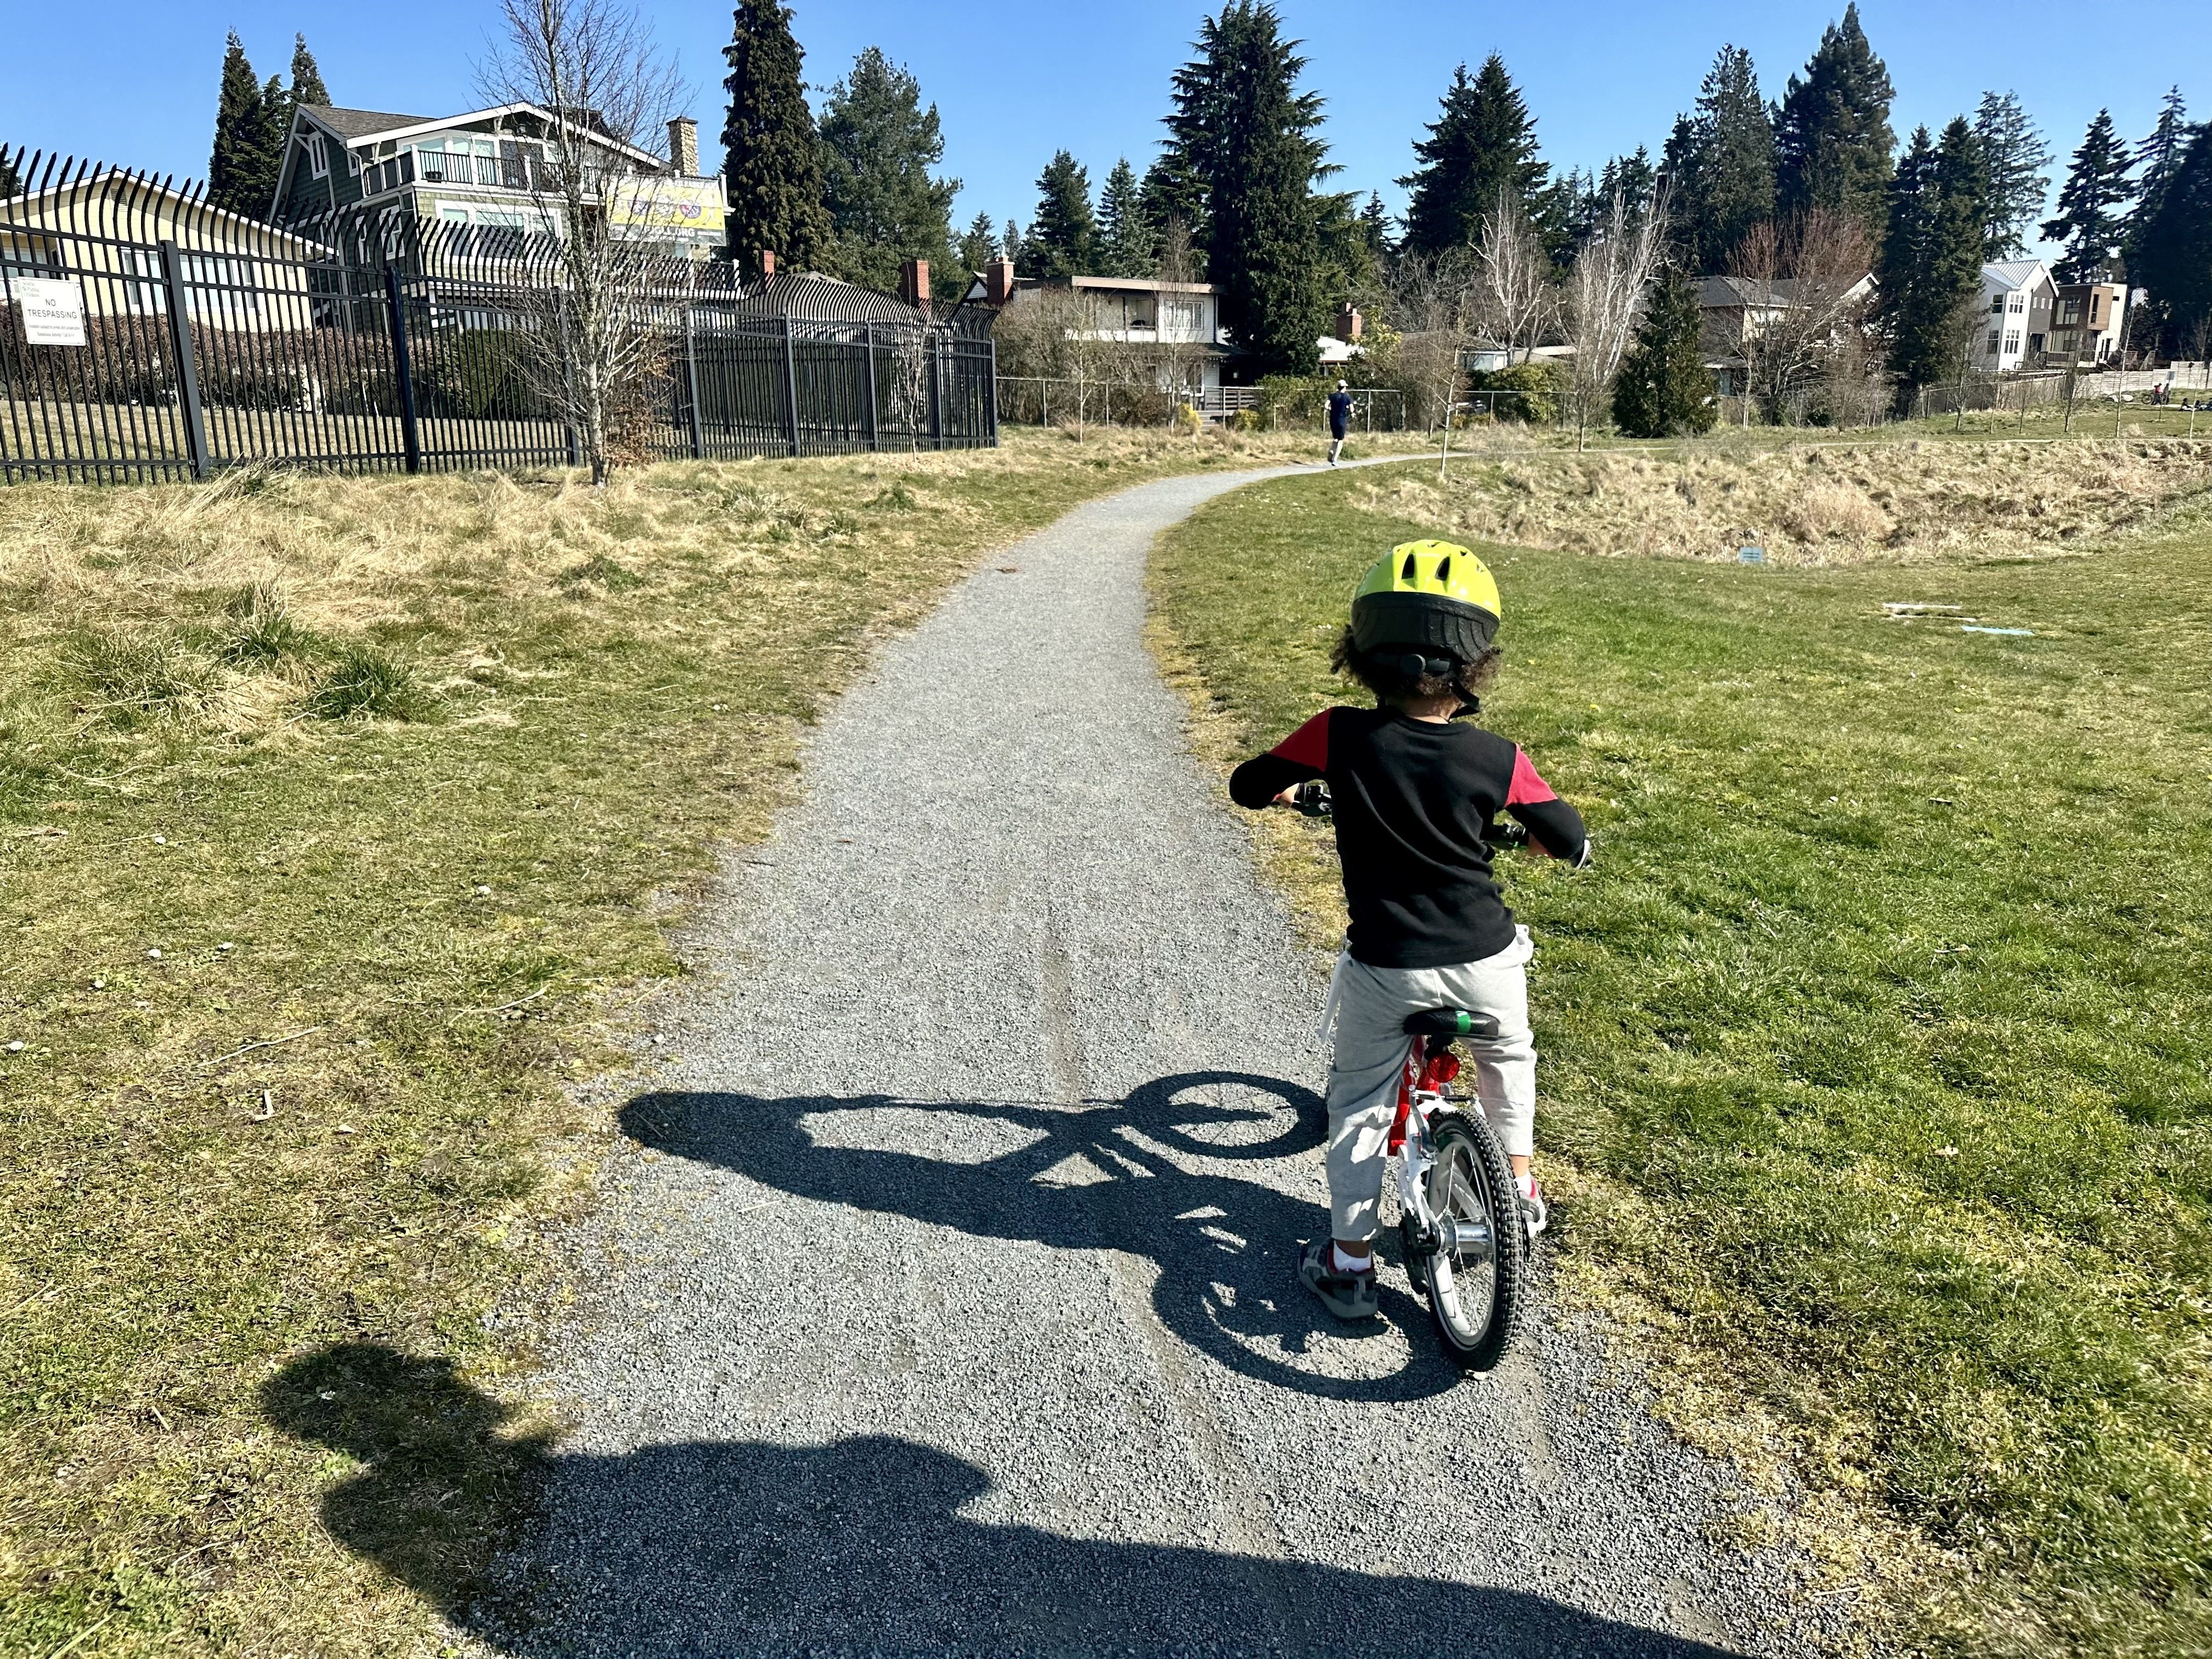 A small child in a lime green helmet straddles a bike on a gravel path, with trees and houses in the background. 